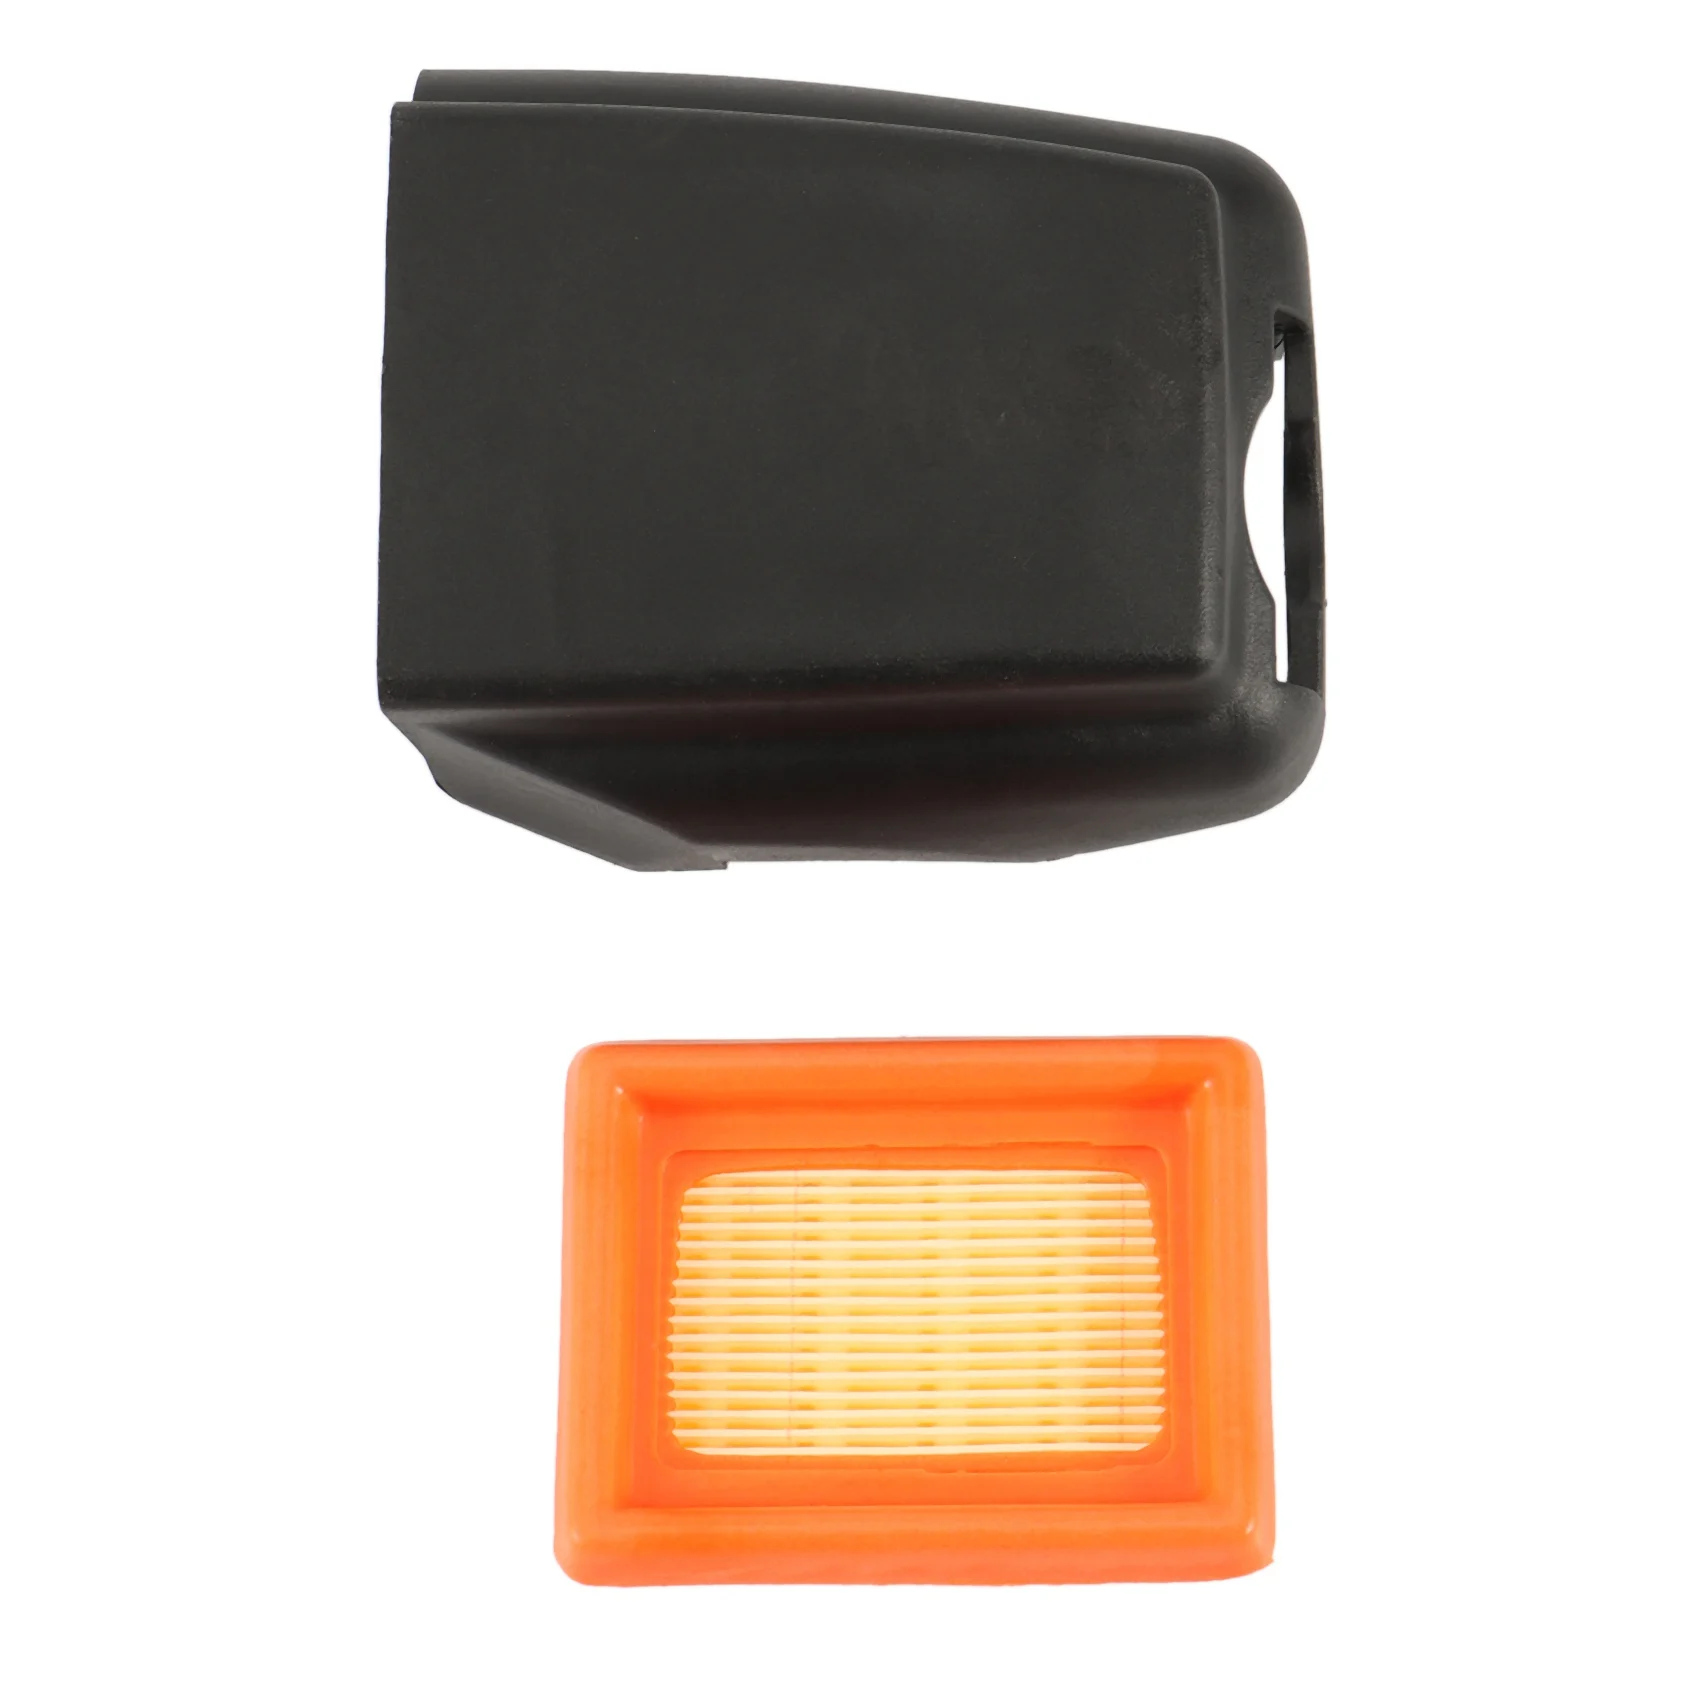 Air Filter Protective Cover for Fs120 Fs200 Fs250 Pruner Trimmer Accessories top quality carburetor diaphragm repair kit for stihl fs120 fs200 fs250 fs300 fs350 fs400 unmatched performance